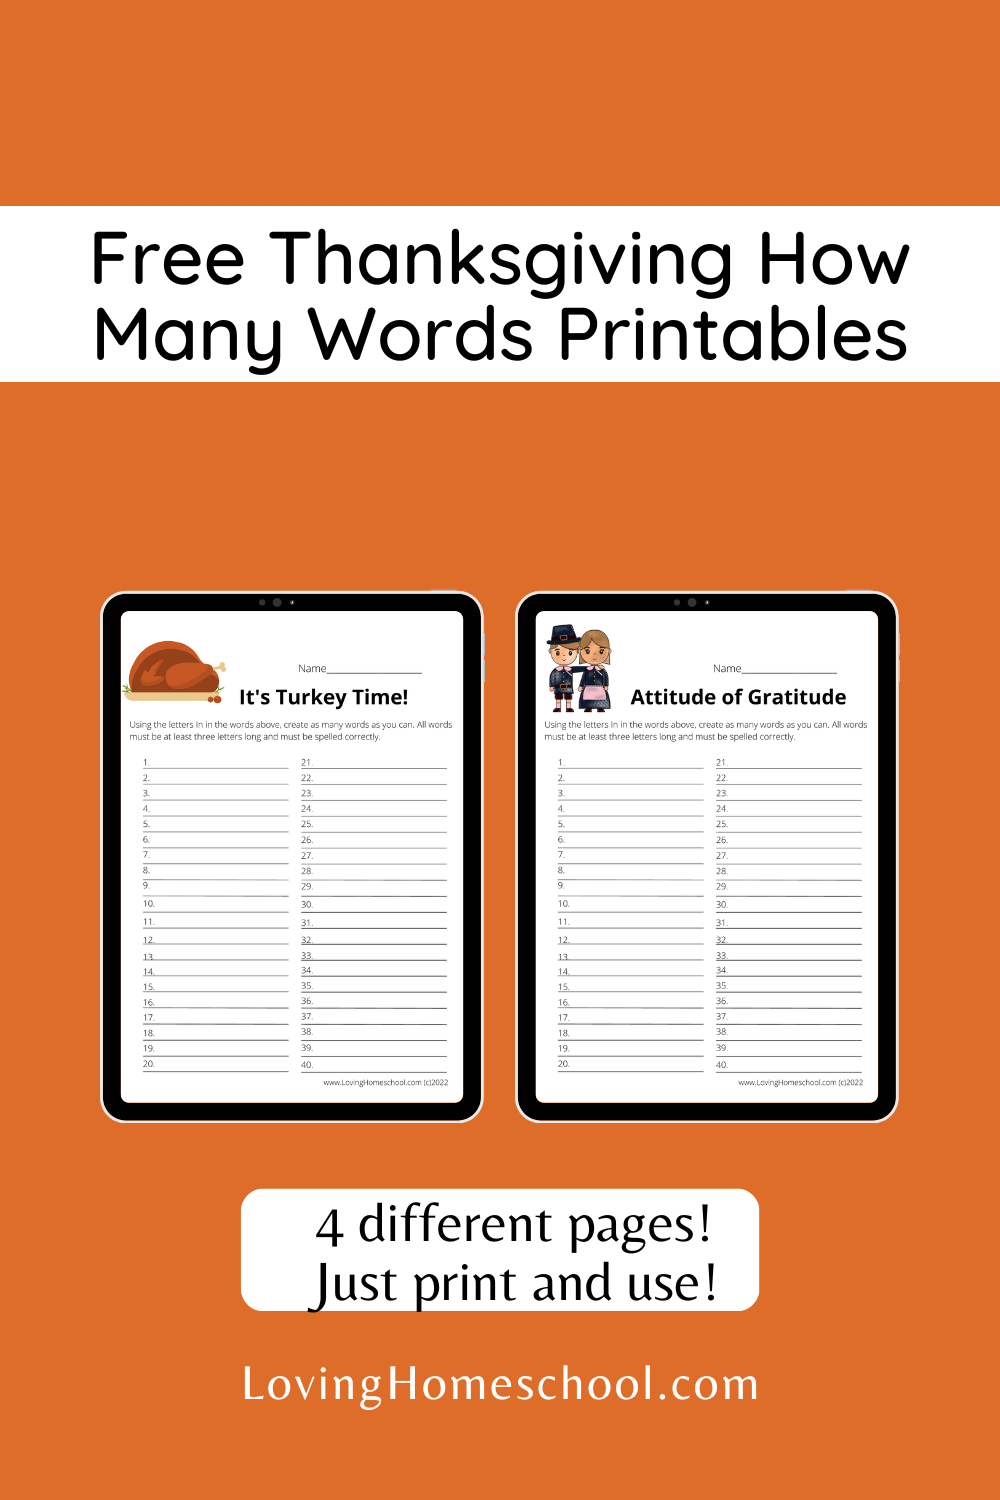 Free Thanksgiving How Many Words Printables Pinterest Pin